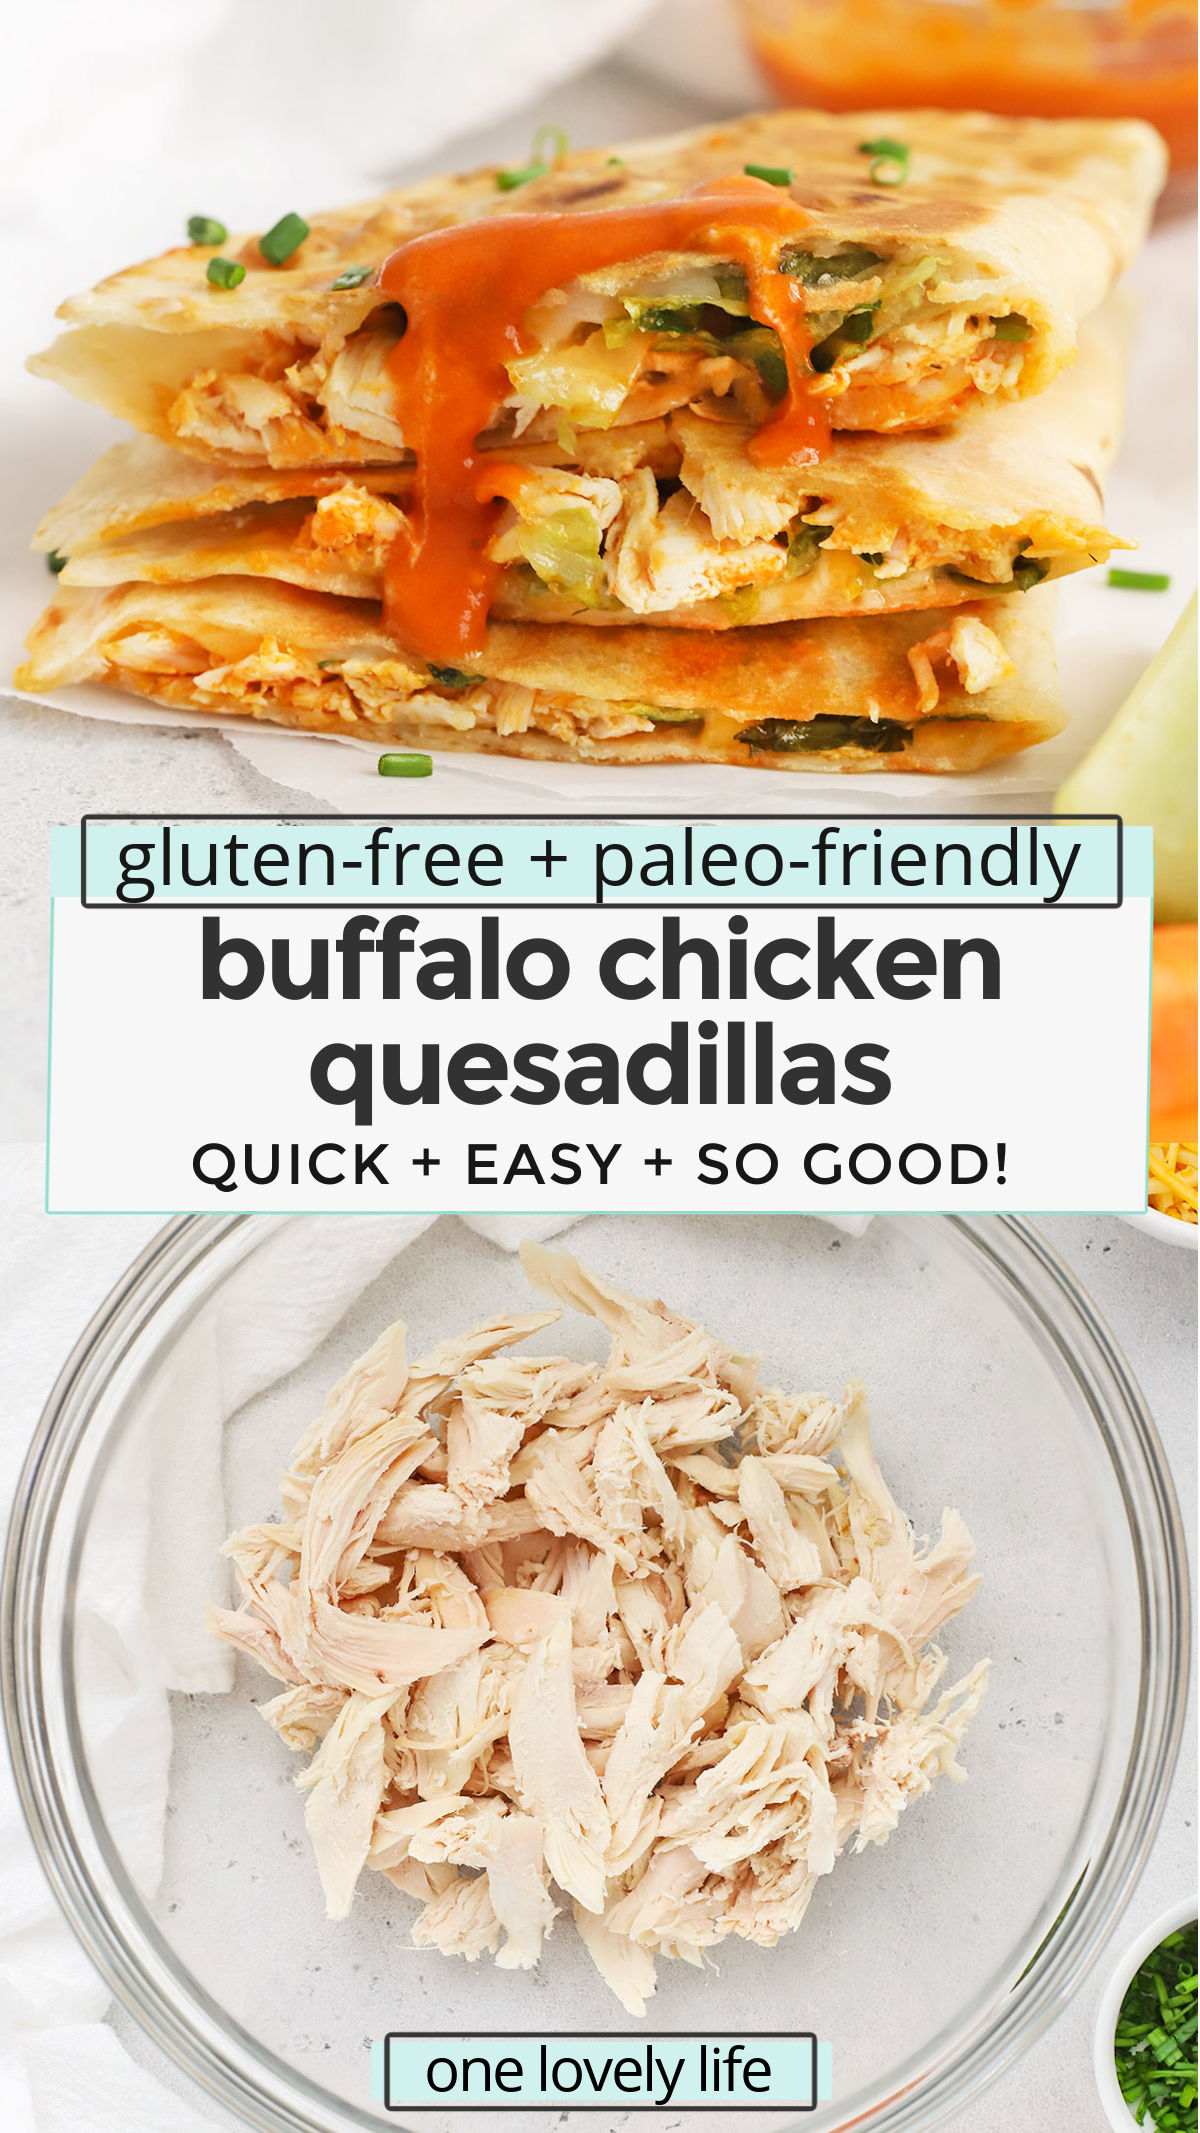 Buffalo Chicken Quesadillas - These gluten-free quesadillas are stuffed with Buffalo chicken, creamy ranch, lettuce, and your favorite cheese. They're quick, easy, and MAJORLY delicious! (Gluten-Free, Grain-Free Friendly // Buffalo Quesadillas // Buffalo Chicken Recipes